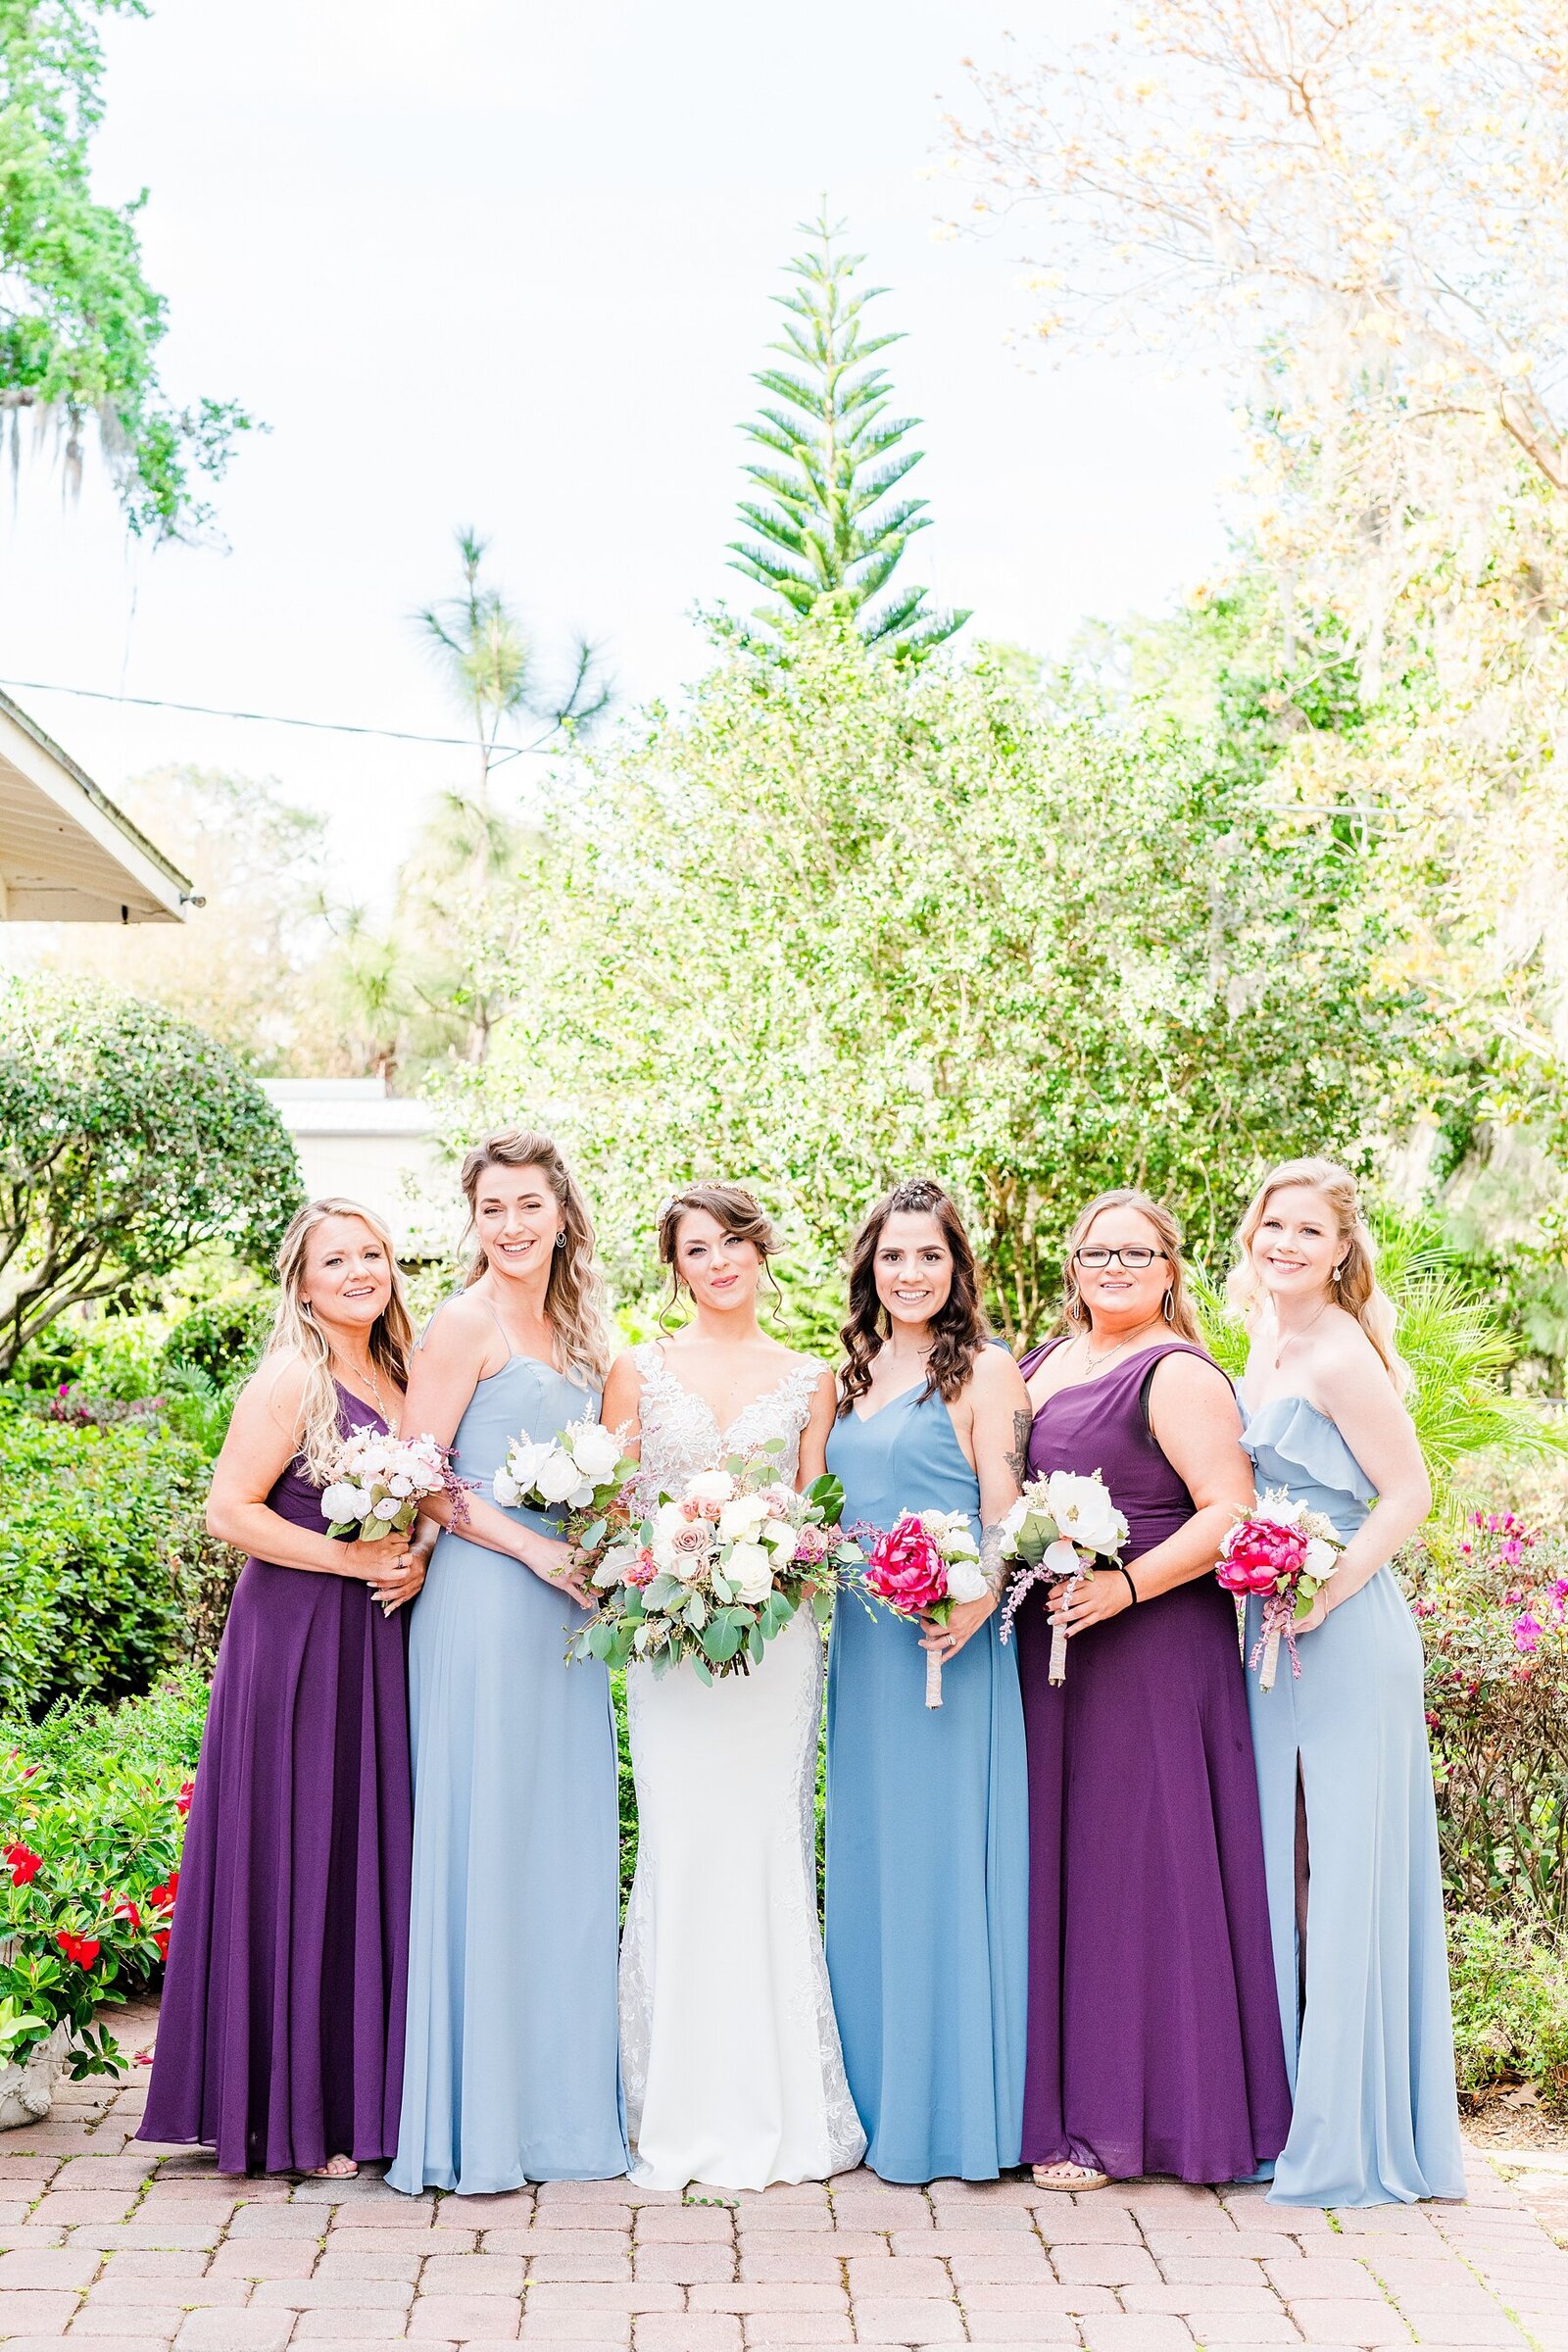 Bride and Bridesmaids | Town Manor | Chynna Pacheco Photography